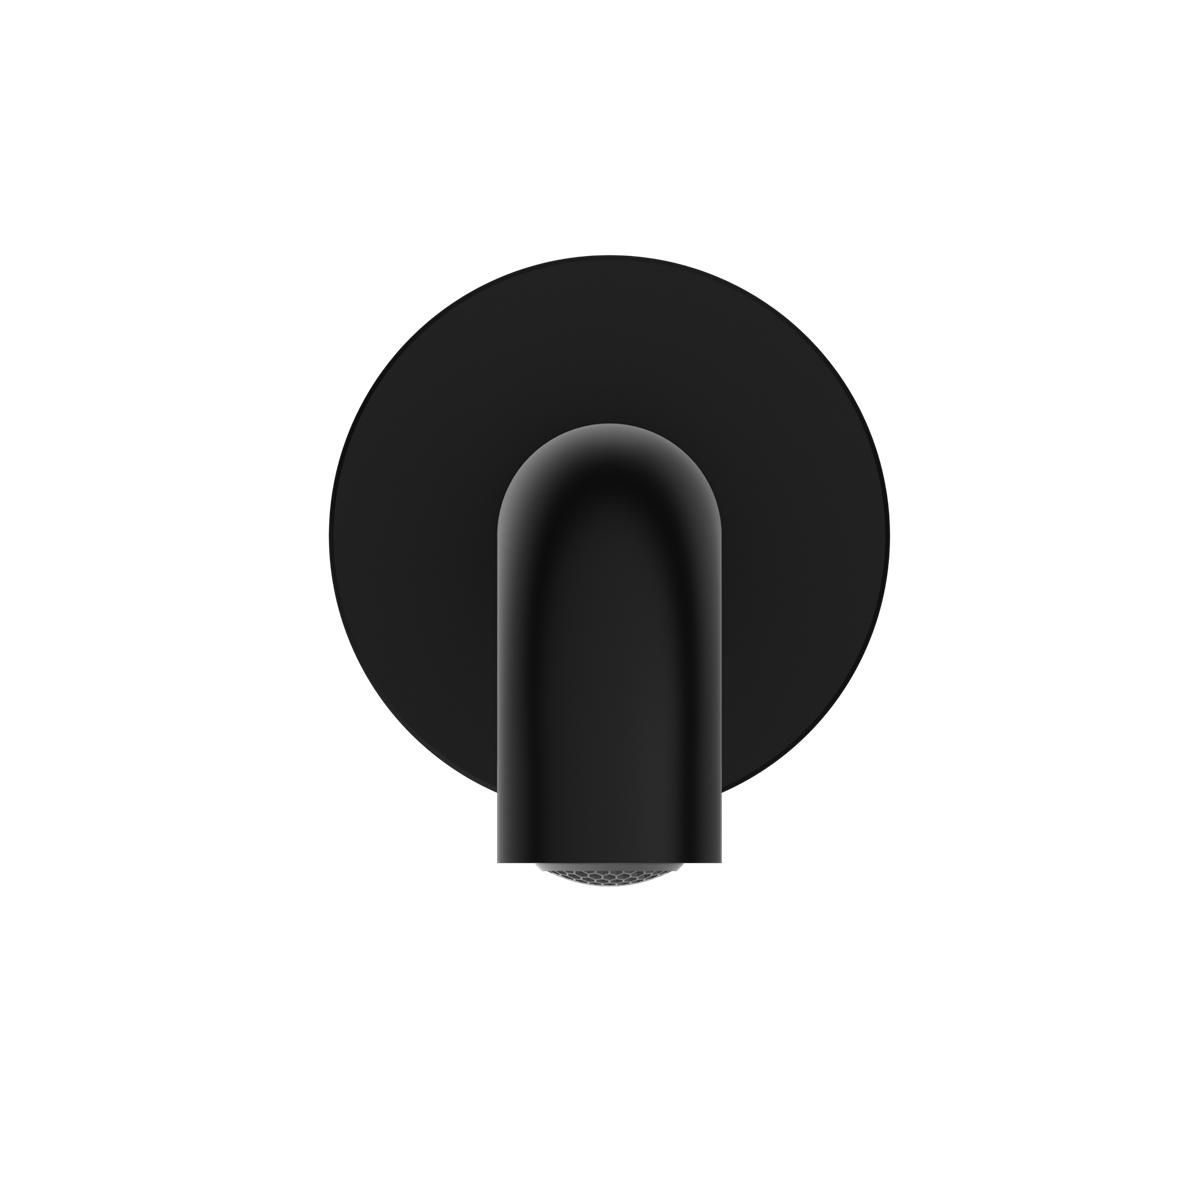 NERO MECCA BASIN/ BATH SPOUT MATTE BLACK (AVAILABLE IN 120MM, 160MM, 185MM, 230MM AND 260MM)